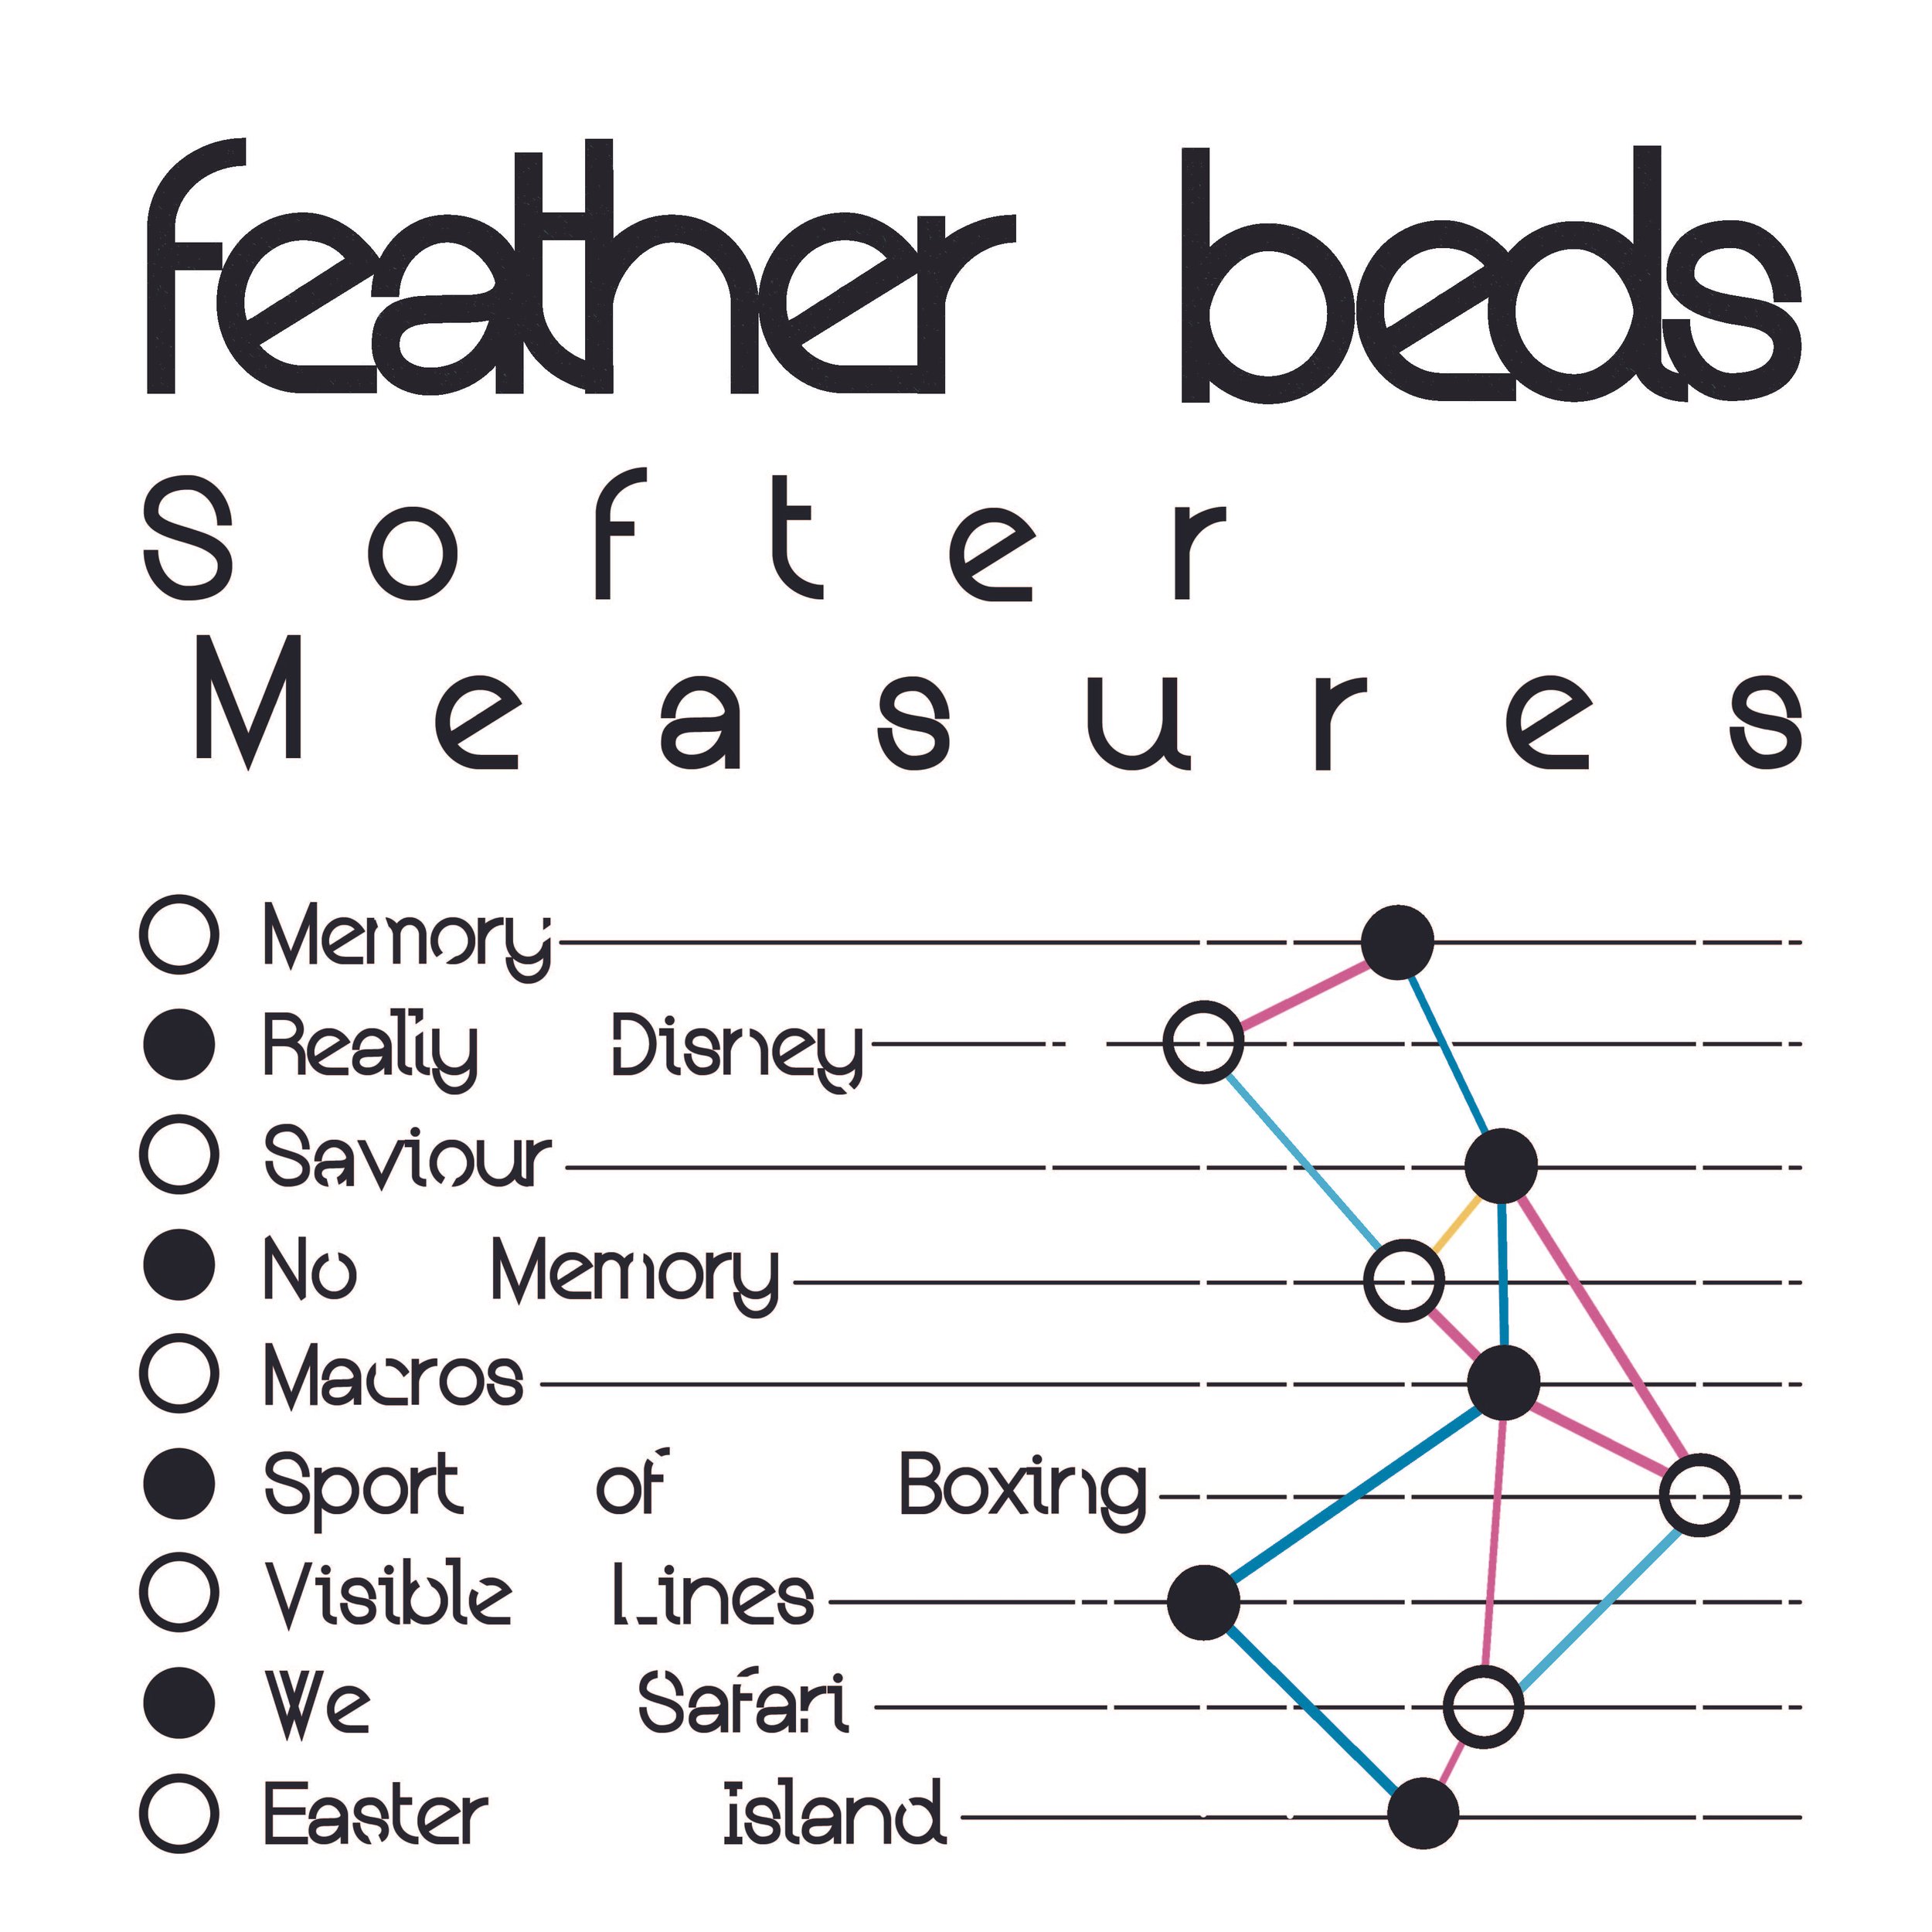 Feather Beds - Softer Measures